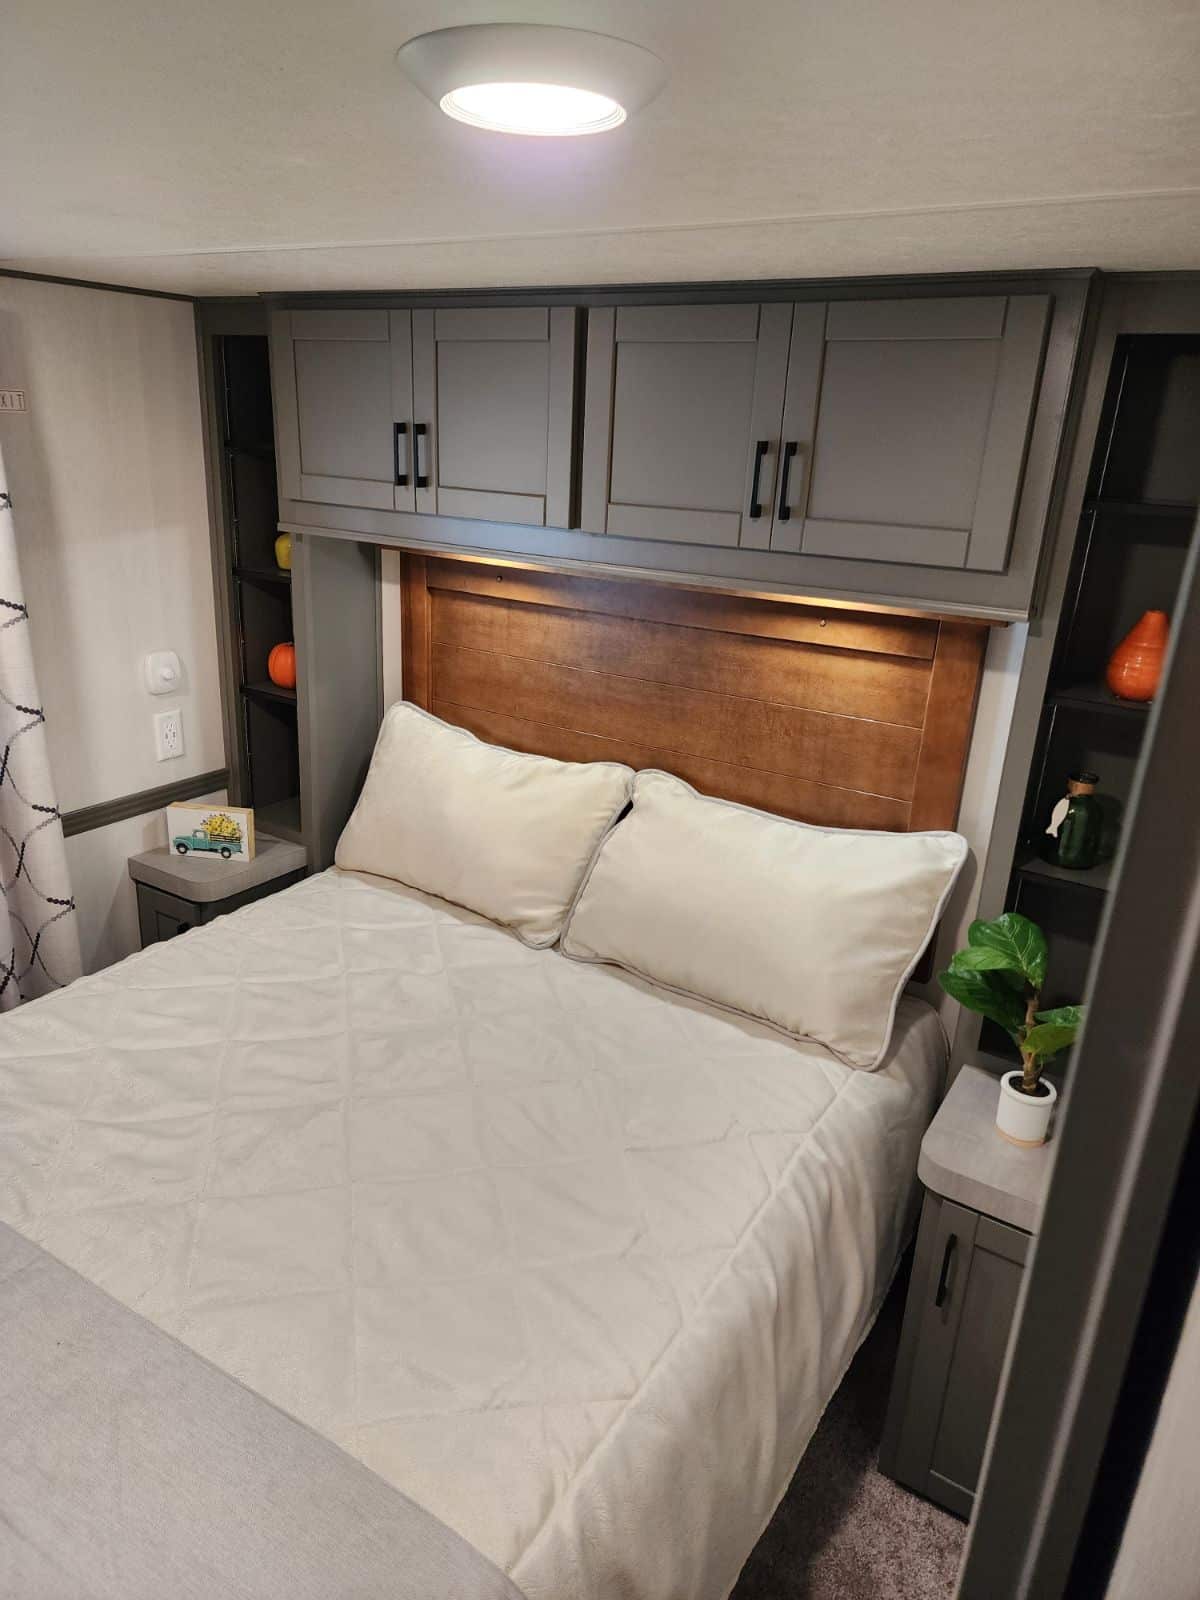 A bedroom with a king-size bed and cabinets in a tiny house.